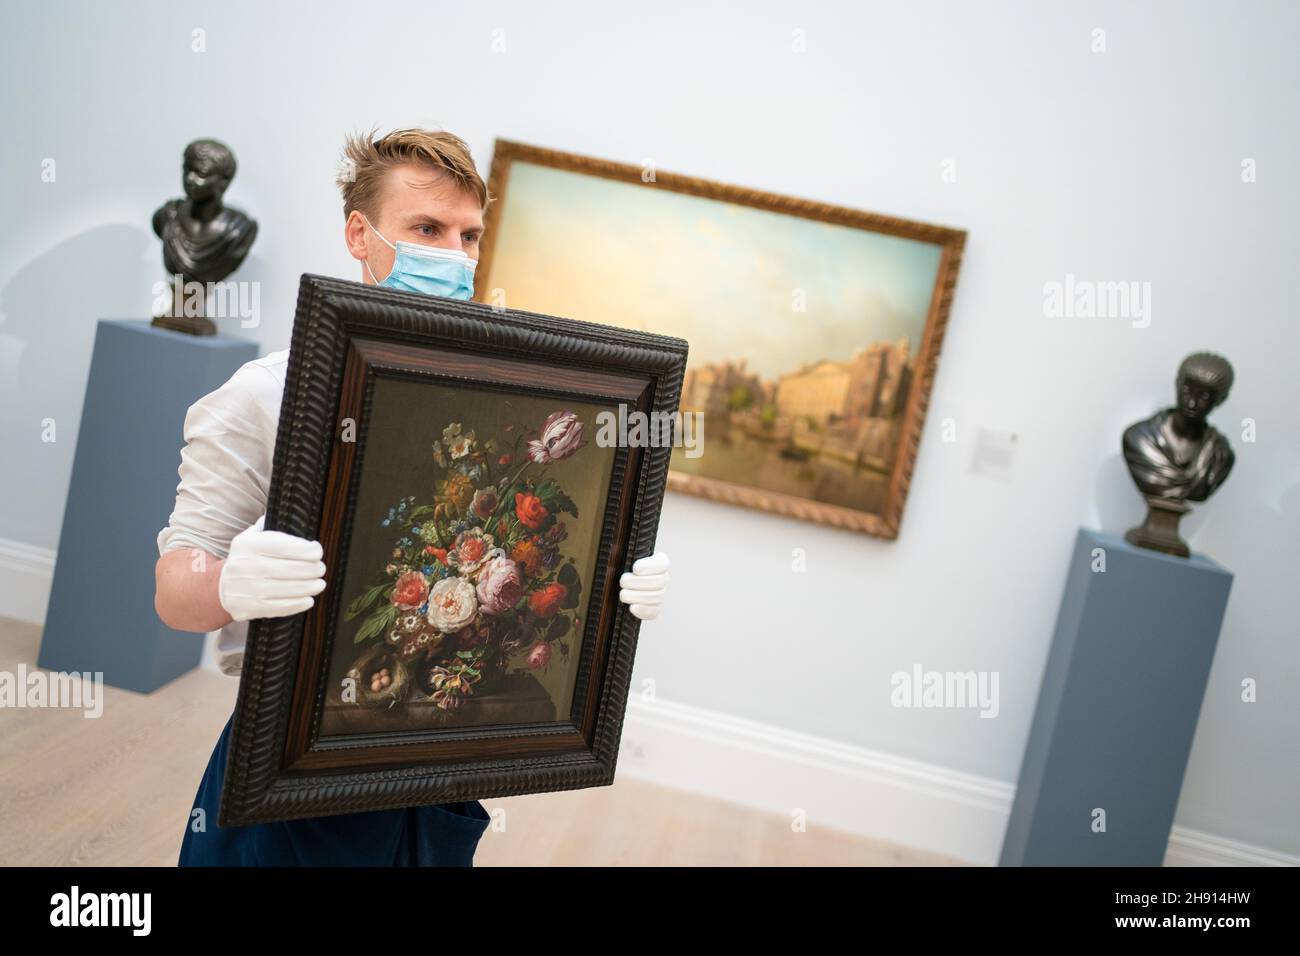 A Sotheby's art handler holds 'Still life of flowers in a vase with a bird's nest upon a mable edge' by Rachel Ruysch, valued at £1,200,000 to £1,800,000, during a photo call at Sotheby's in Mayfair, London, for their forthcoming flagship Old Masters Evening Sale which includes a rediscovered study by John Constable, a rarely seen pair of portraits by Sir Anthony Van Dyck and a recently rediscovered oil painting by JMW Turner. Picture date: Friday December 3, 2021. Stock Photo